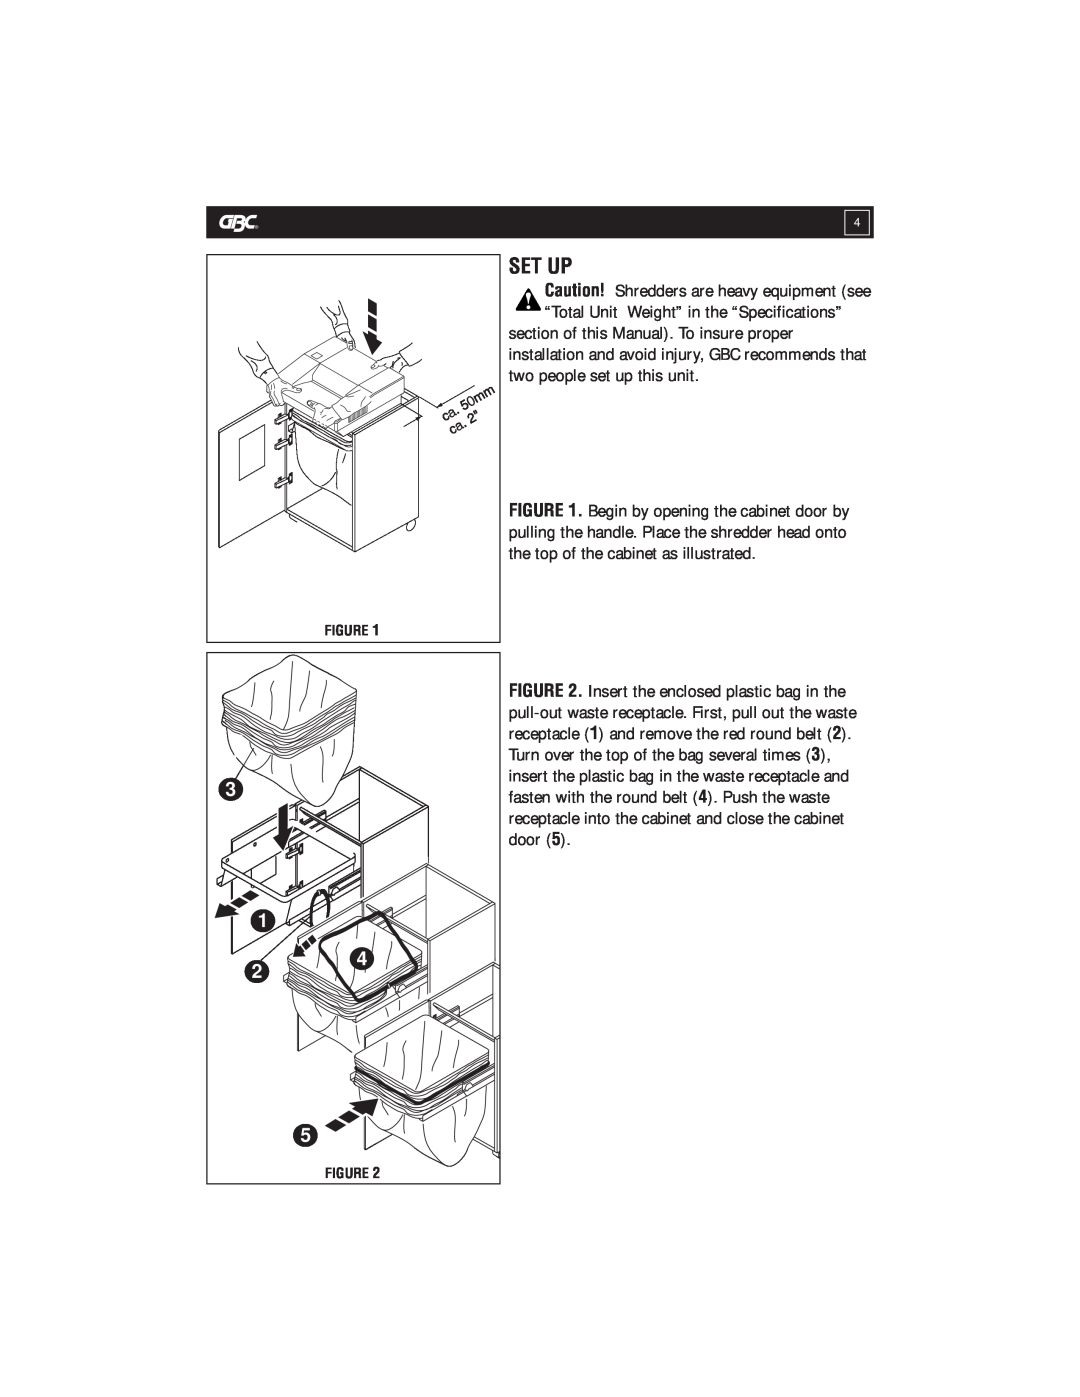 GBC 5570X warranty Set Up, section of this Manual. To insure proper, two people set up this unit, door 